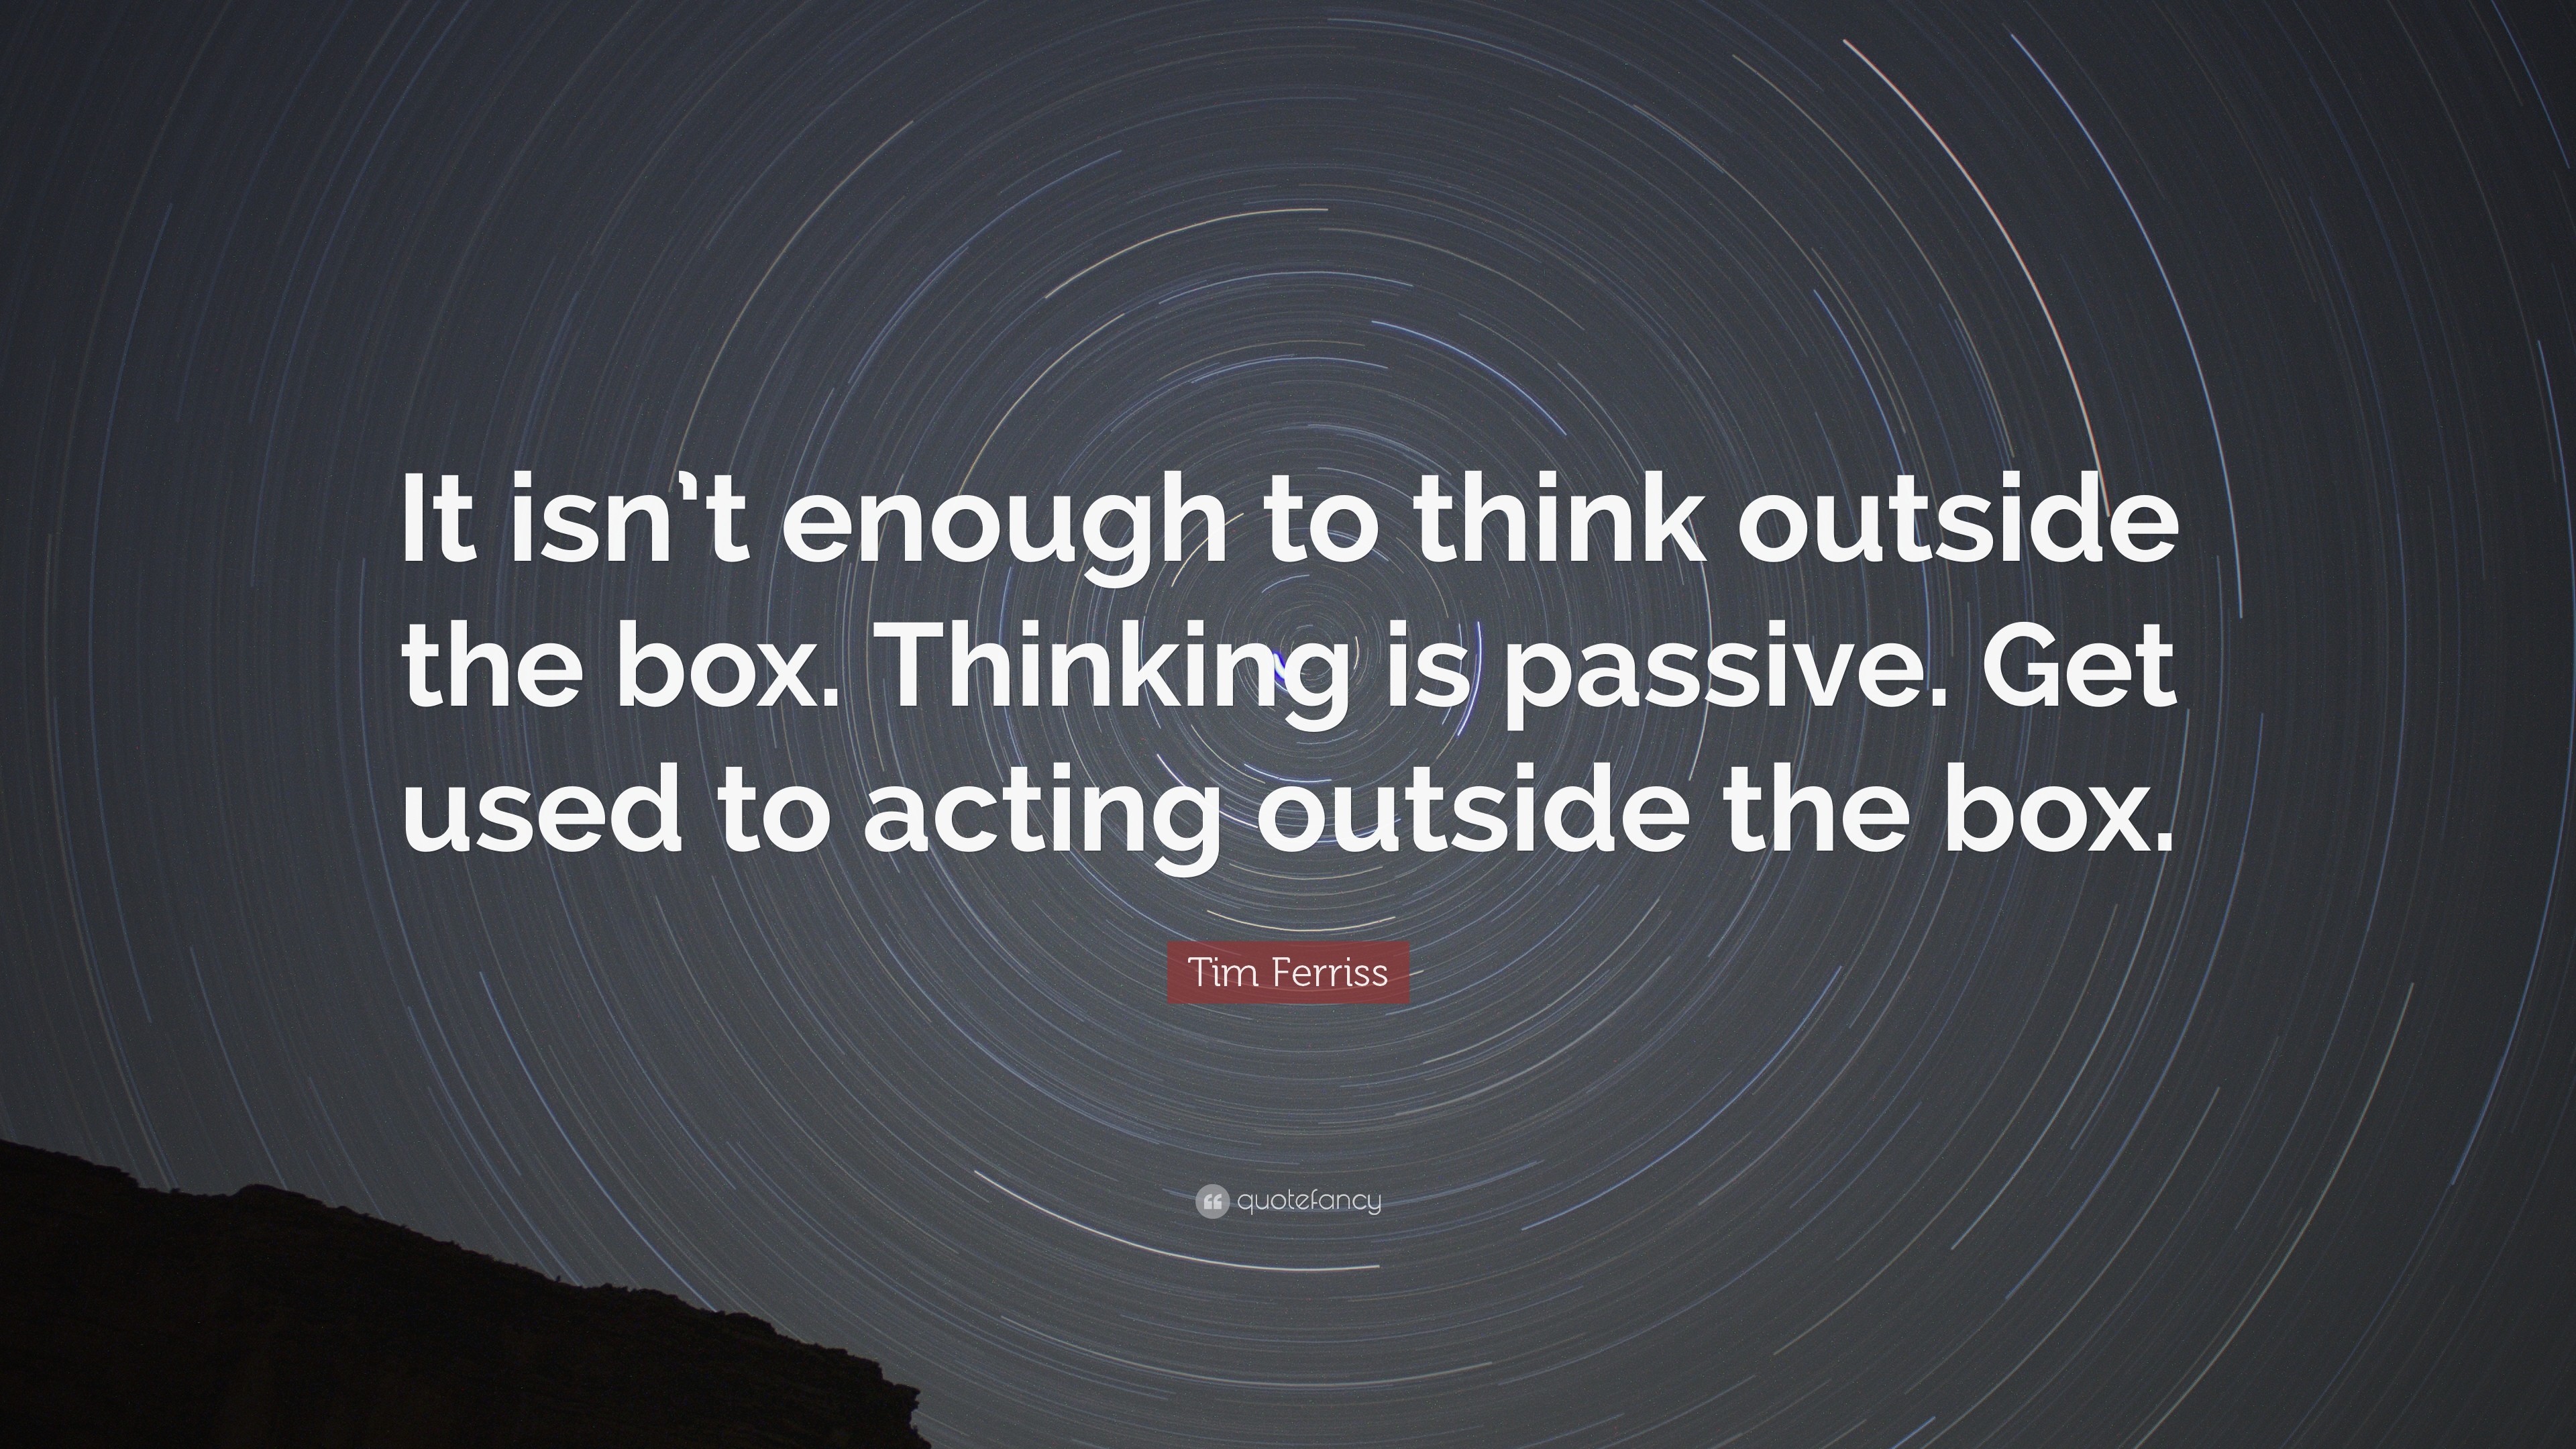 3840x2160 Quotes About Thinking: “It isn't enough to think outside the box.